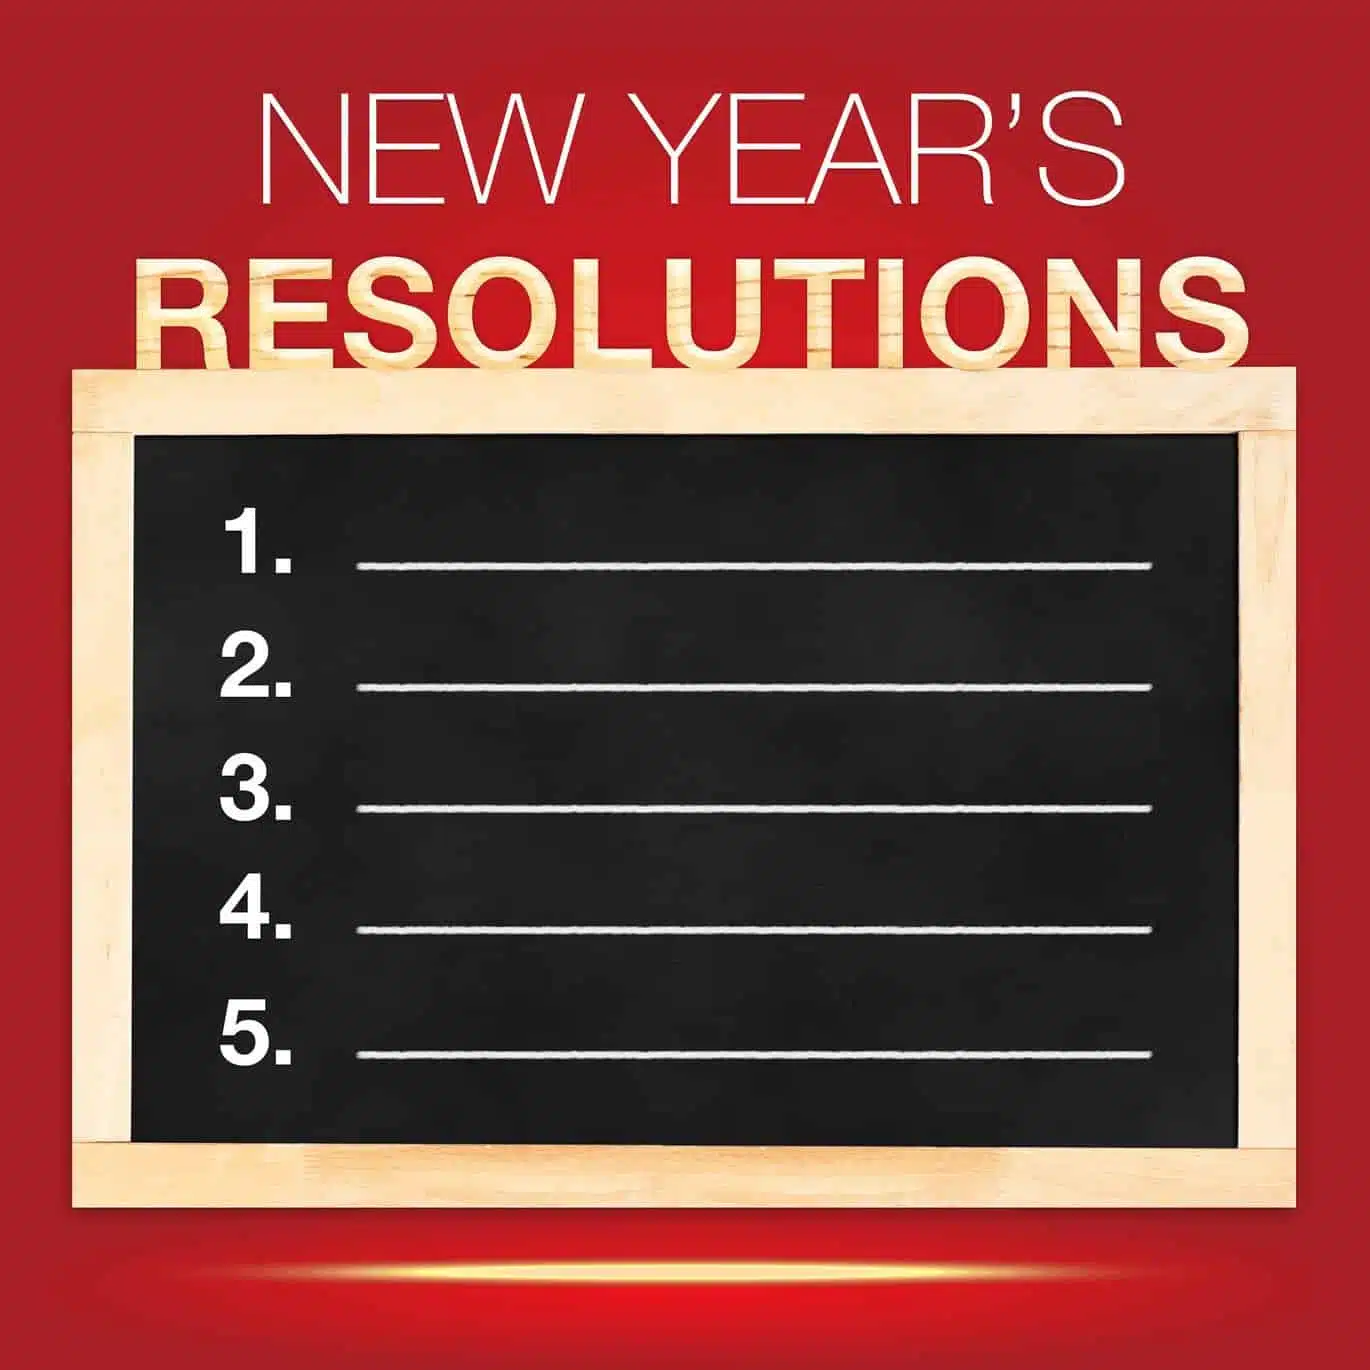 7 Tips for Setting Realistic New Year’s Goals Image